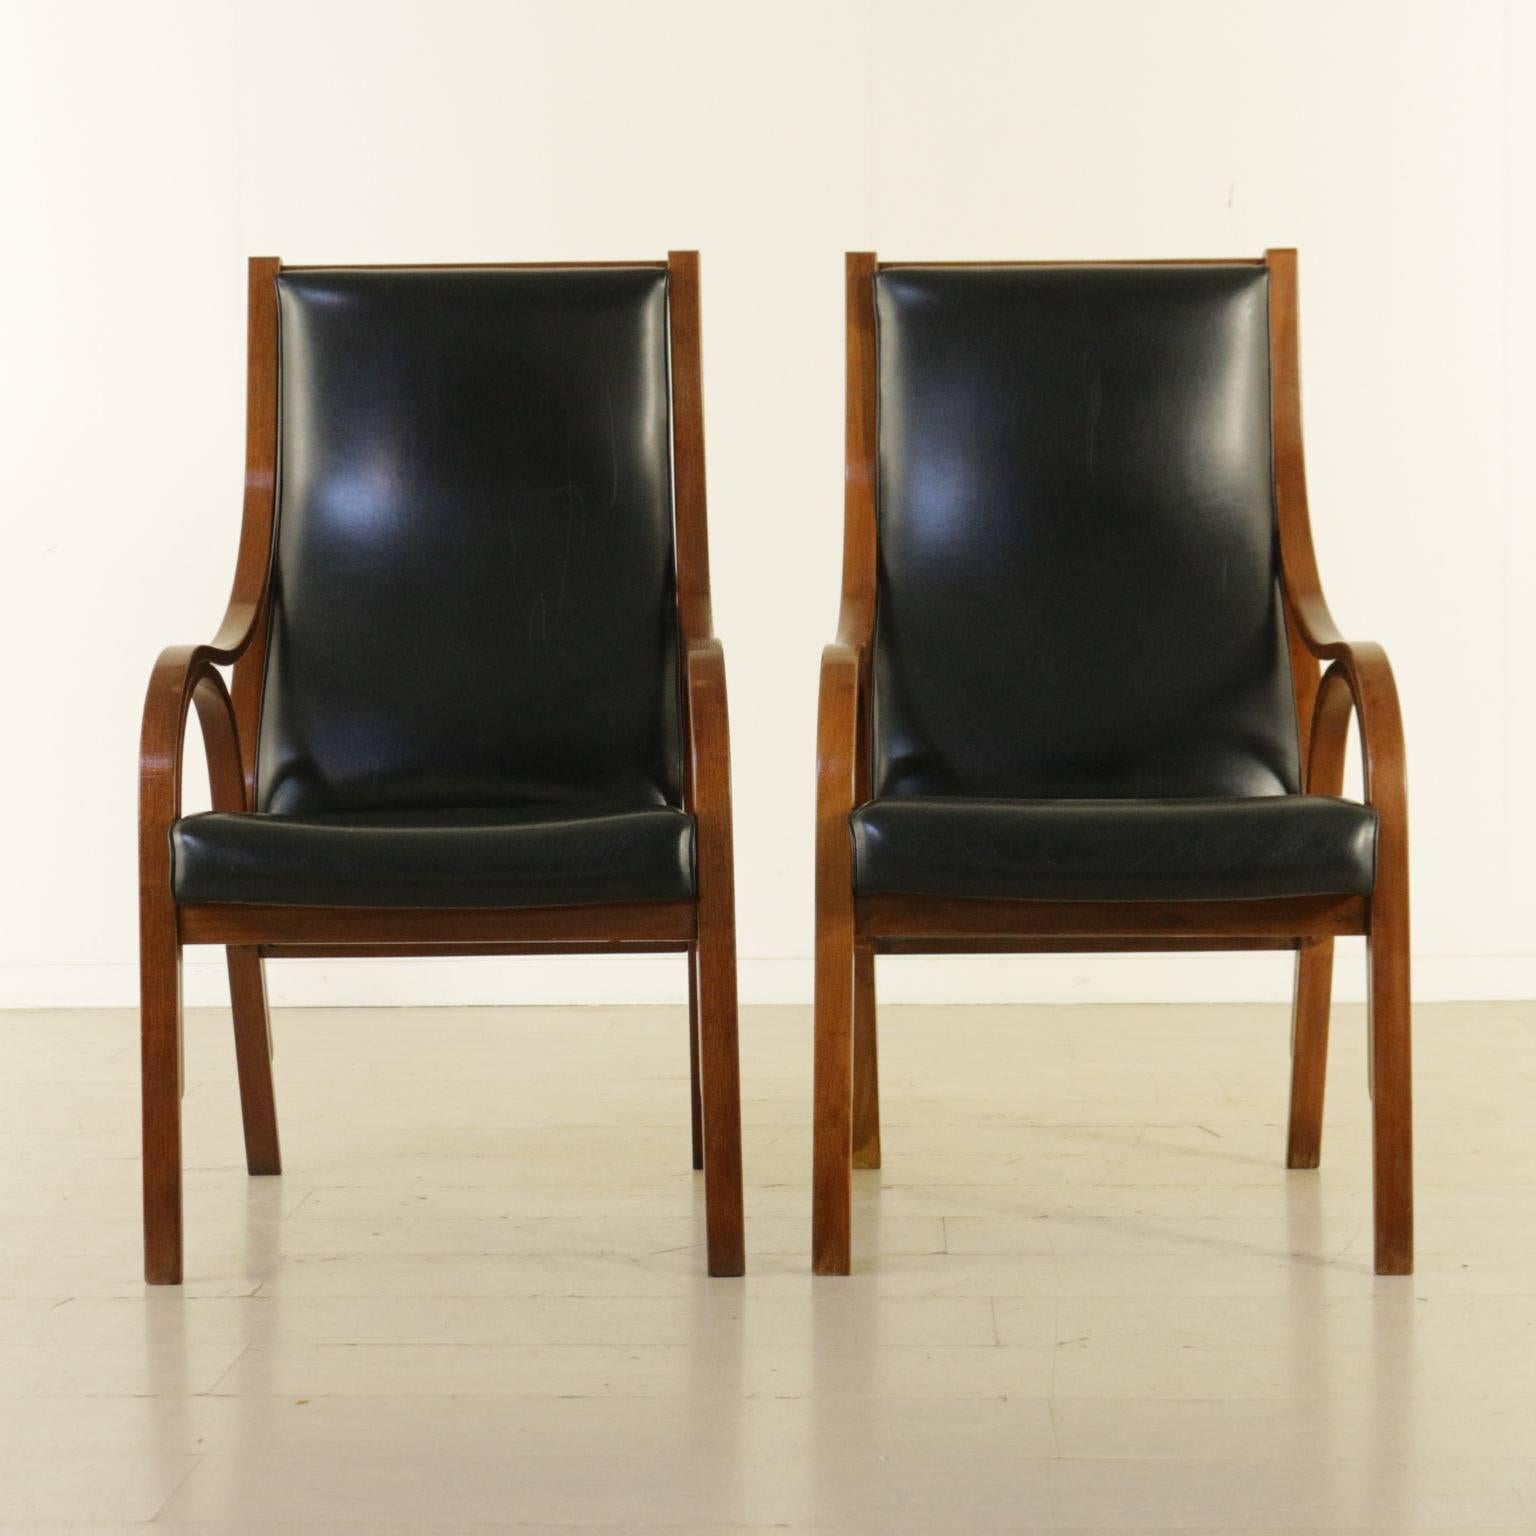 A pair of Cavour armchairs designed by Giotto Stoppino, Lodovico Meneghetti and Vittorio Gregotti for Sim. Made of laminated bentwood, curled hair padding and leatherette upholstery. Manufactured in Italy, 1960s.